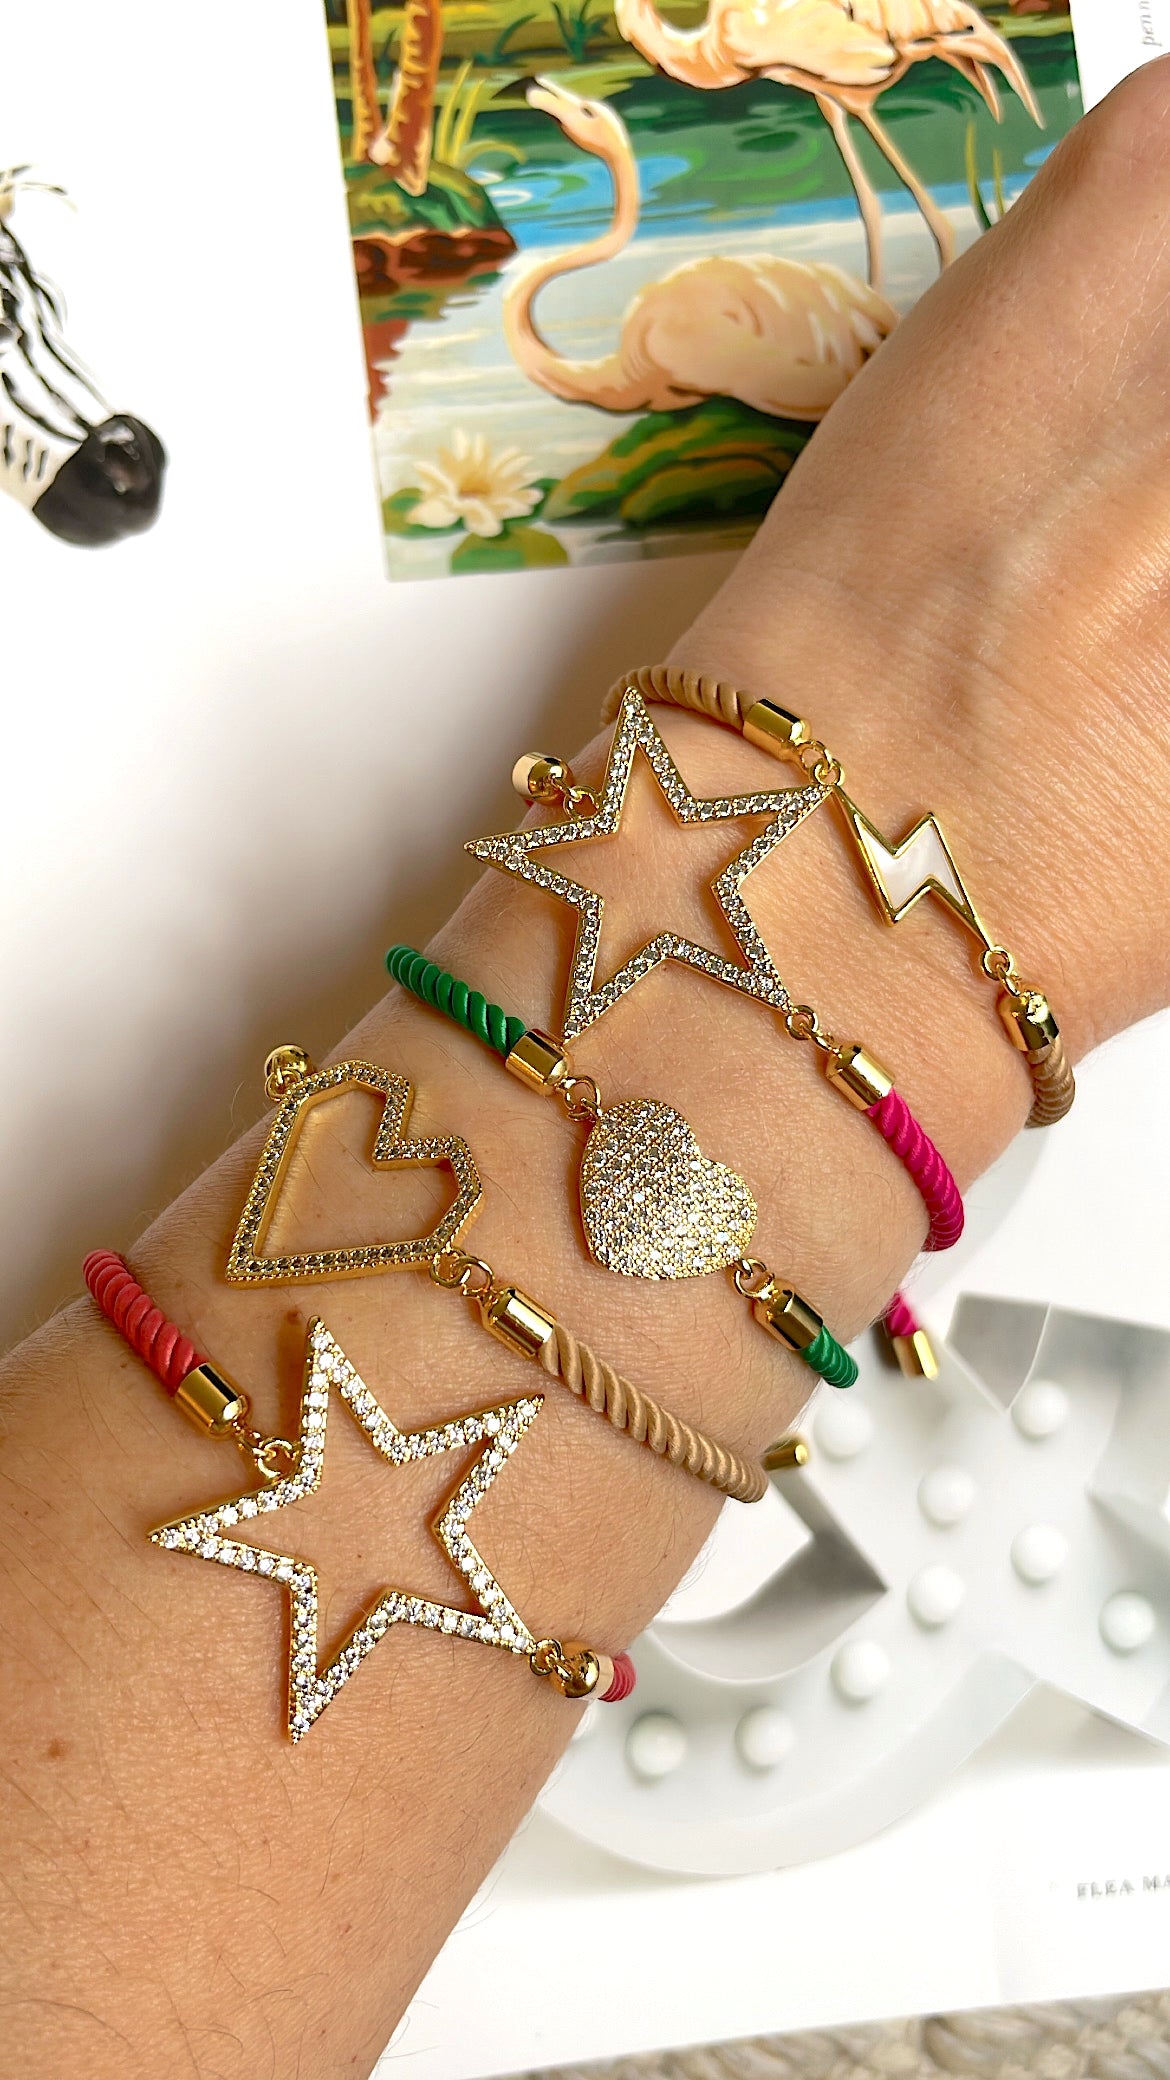 Charm with colored bracelets